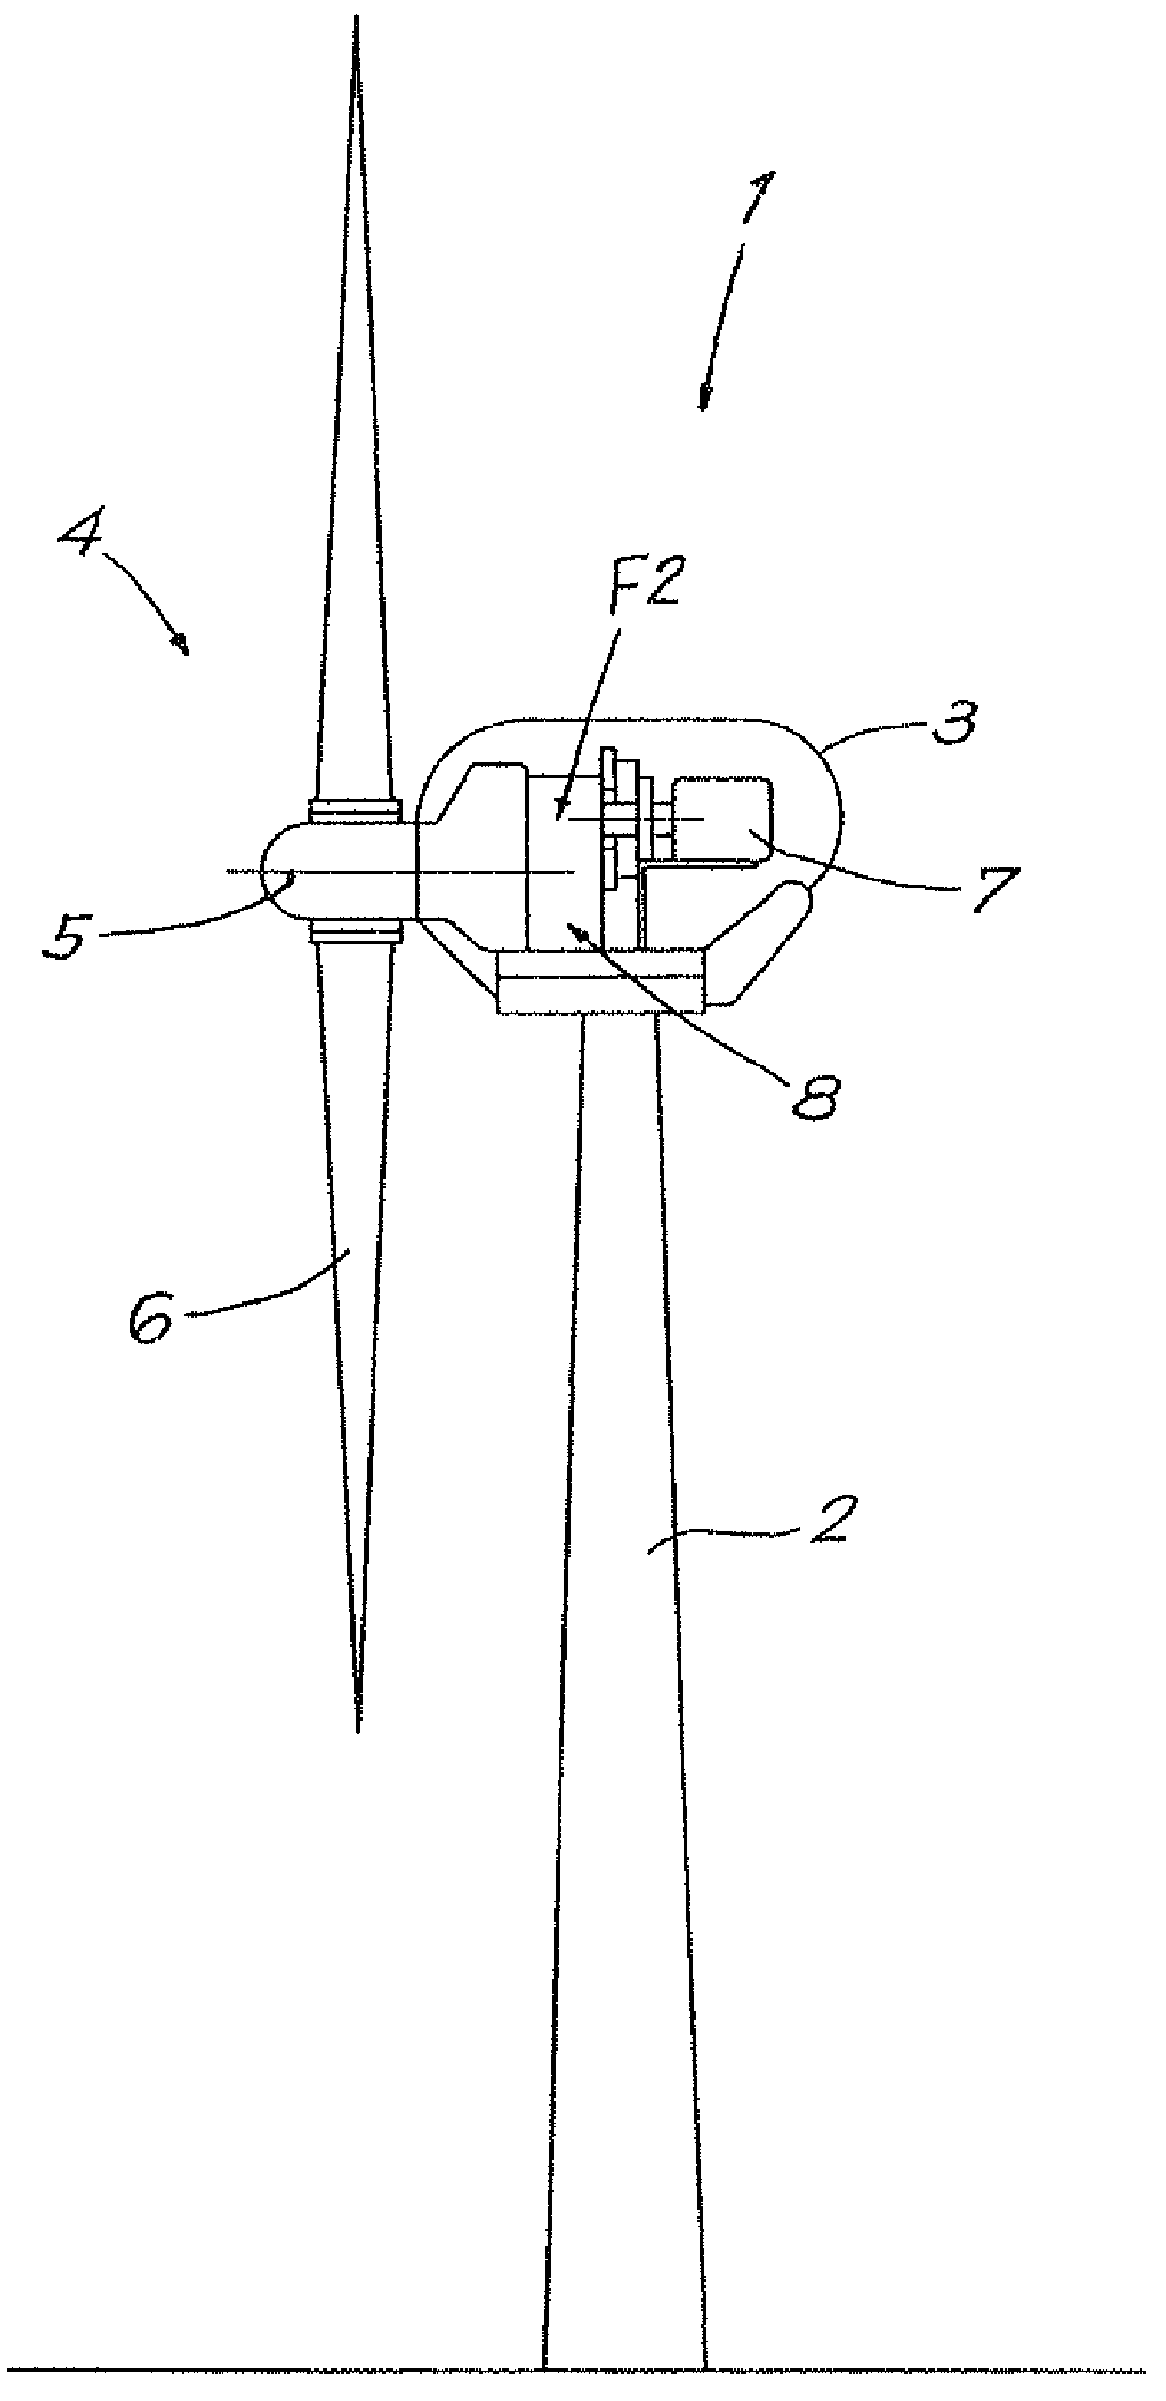 Planetary type gear unit comprising a planet carrier with a planet bogie plate